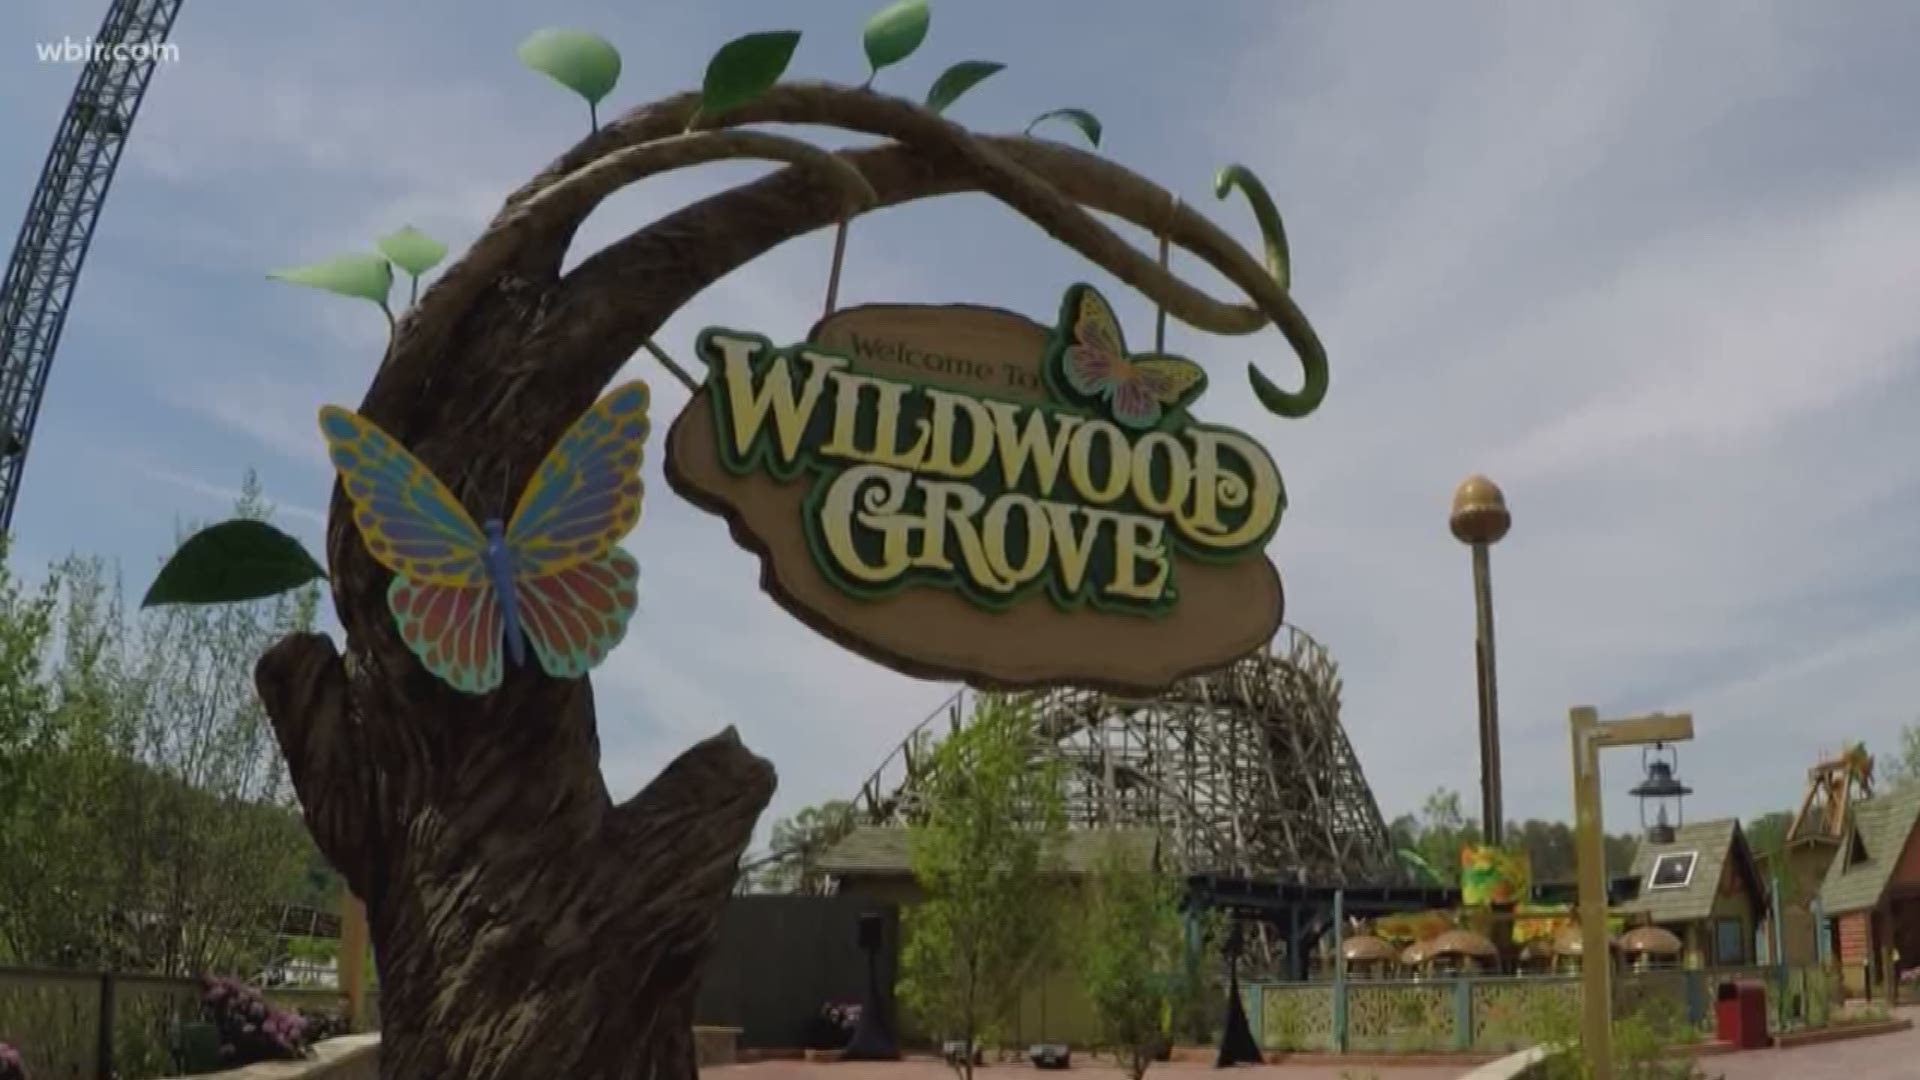 Dolly Parton wanted 'Wildwood Grove' to be a place for families to enjoy together. Her dream is now open to the public. A look at some of the things to do at this new expansion project. Visit dollywood.com to learn more. May 10, 2019-4pm